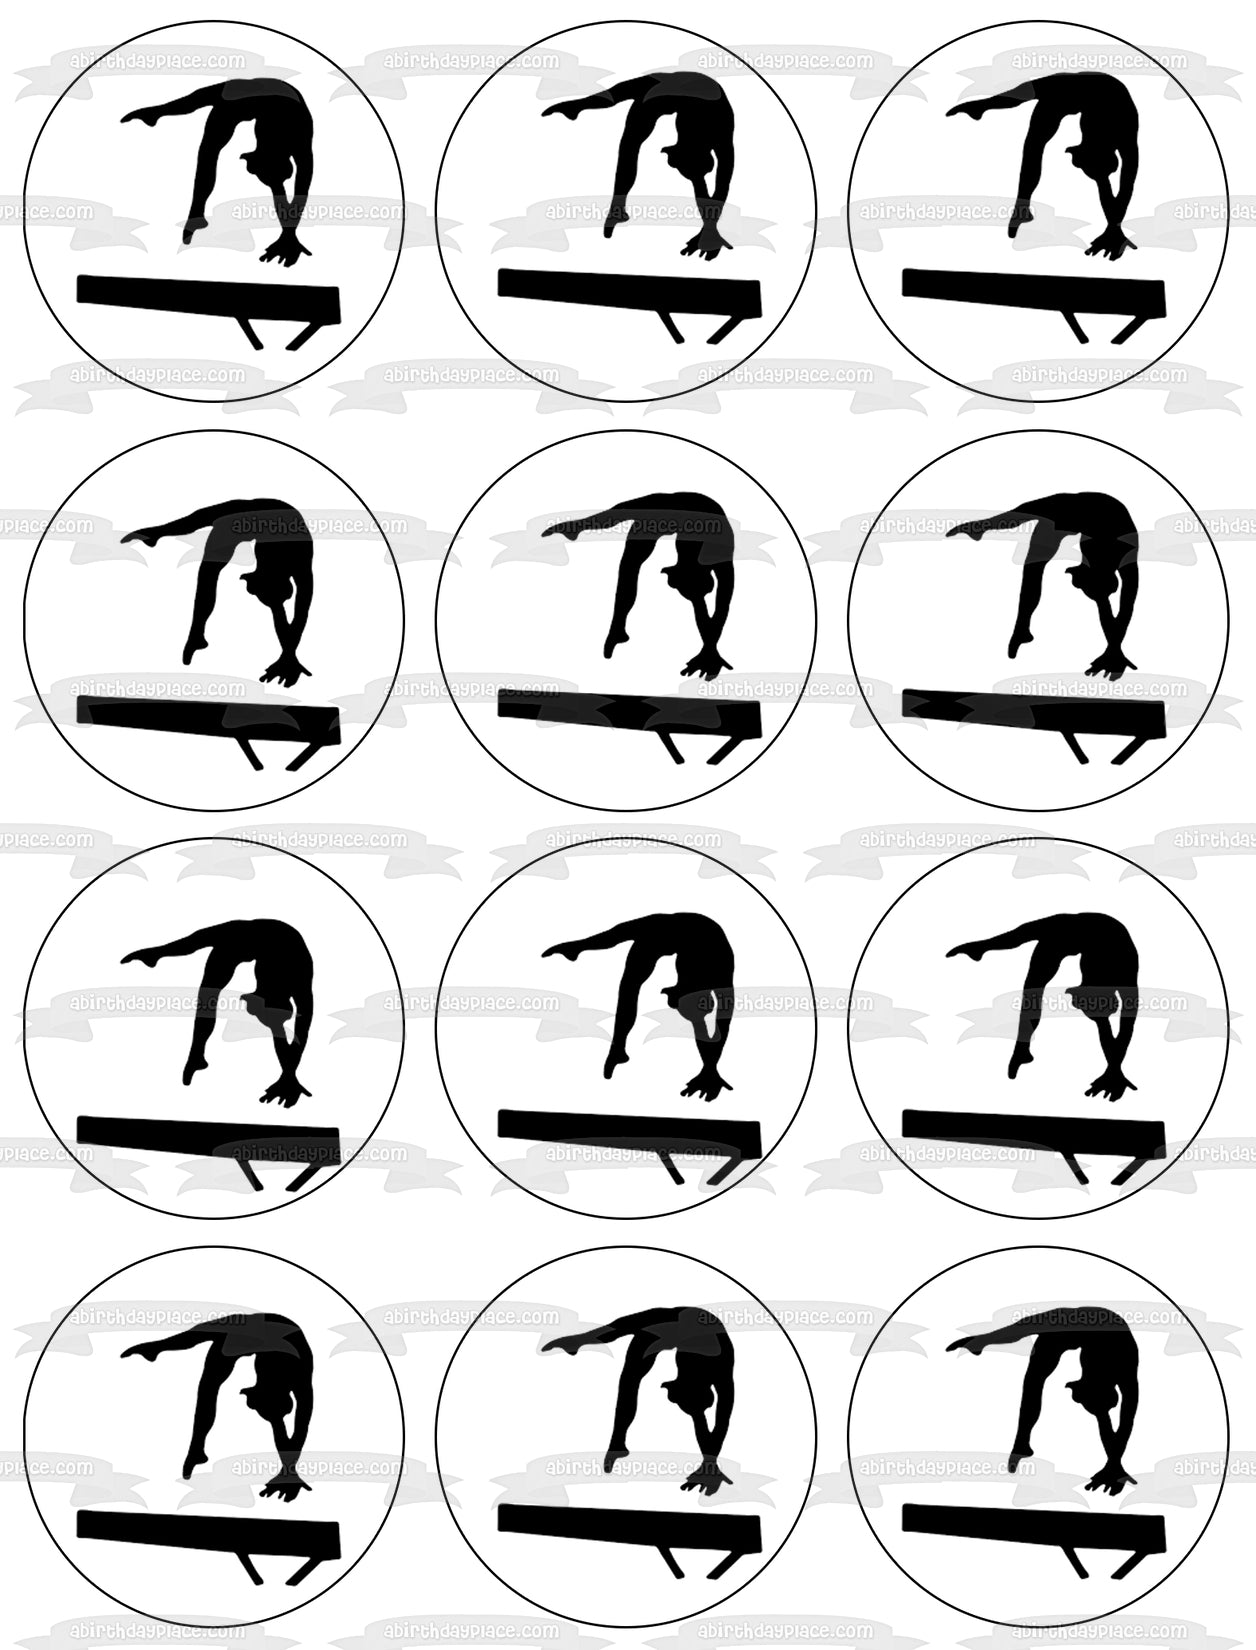 Gymnastics High Jump Sport Silhouettes Edible Cake Topper Image ABPID55863